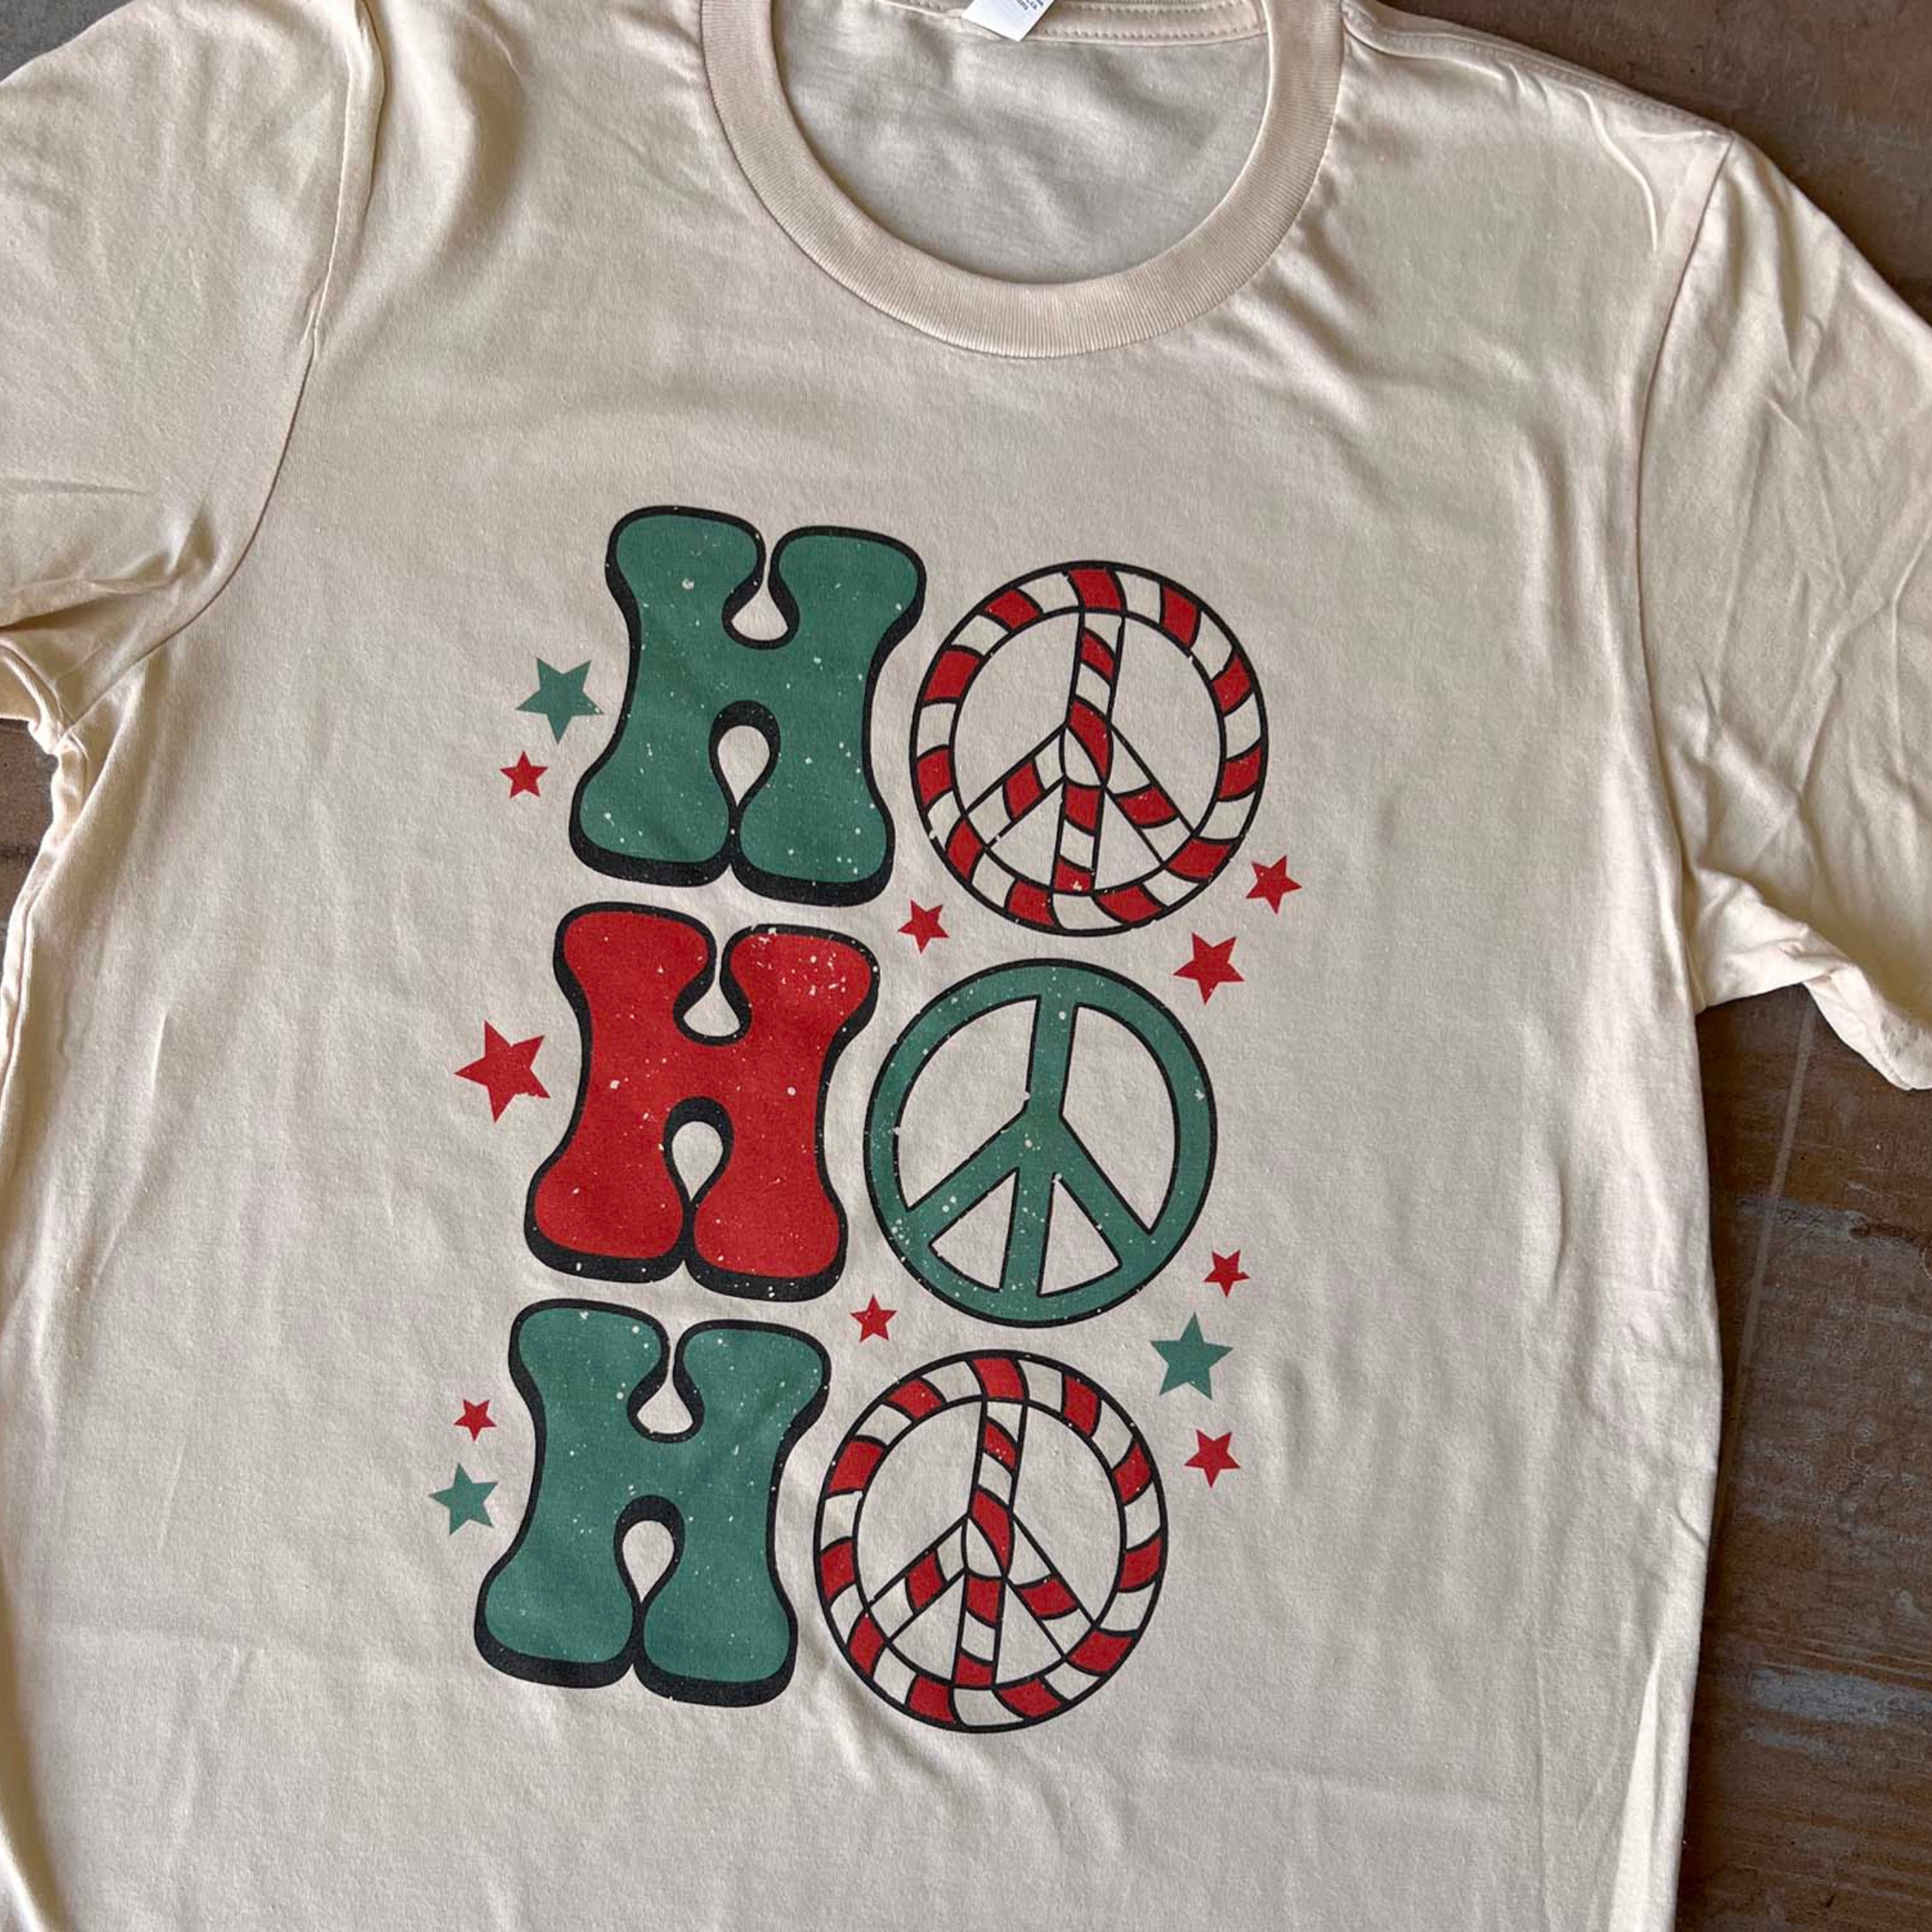 This cream tee includes a crew neckline, short sleeves, and a graphic that says "Ho Ho Ho" in a mix of cute font in red and green. The O's are peace signs and stars are all around the graphic. This tee is shown here as a flat lay. 